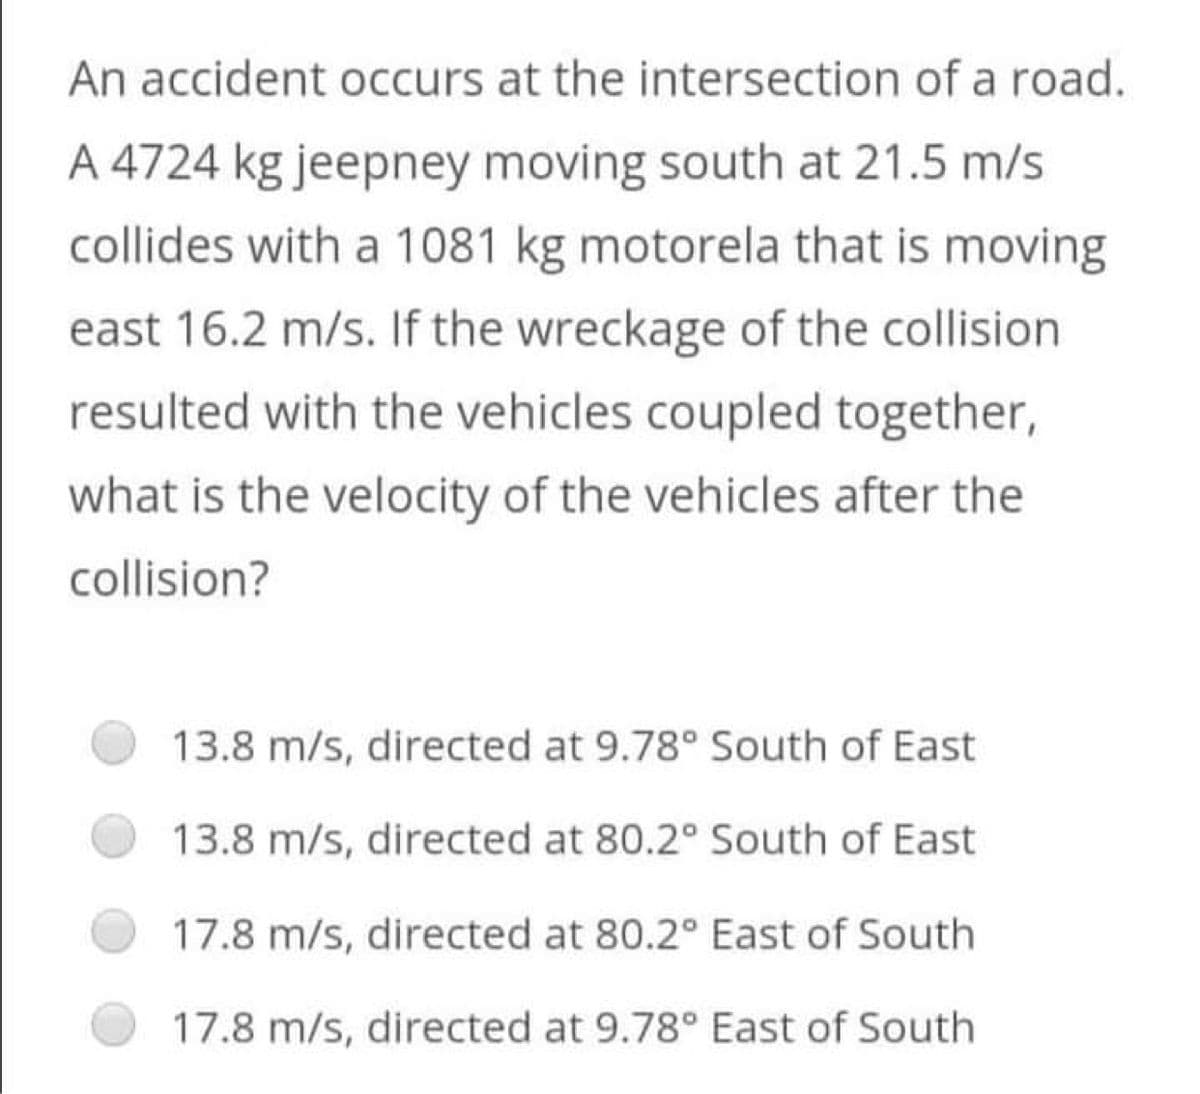 An accident occurs at the intersection of a road.
A 4724 kg jeepney moving south at 21.5 m/s
collides with a 1081 kg motorela that is moving
east 16.2 m/s. If the wreckage of the collision
resulted with the vehicles coupled together,
what is the velocity of the vehicles after the
collision?
13.8 m/s, directed at 9.78° South of East
13.8 m/s, directed at 80.2° South of East
17.8 m/s, directed at 80.2° East of South
17.8 m/s, directed at 9.78° East of South